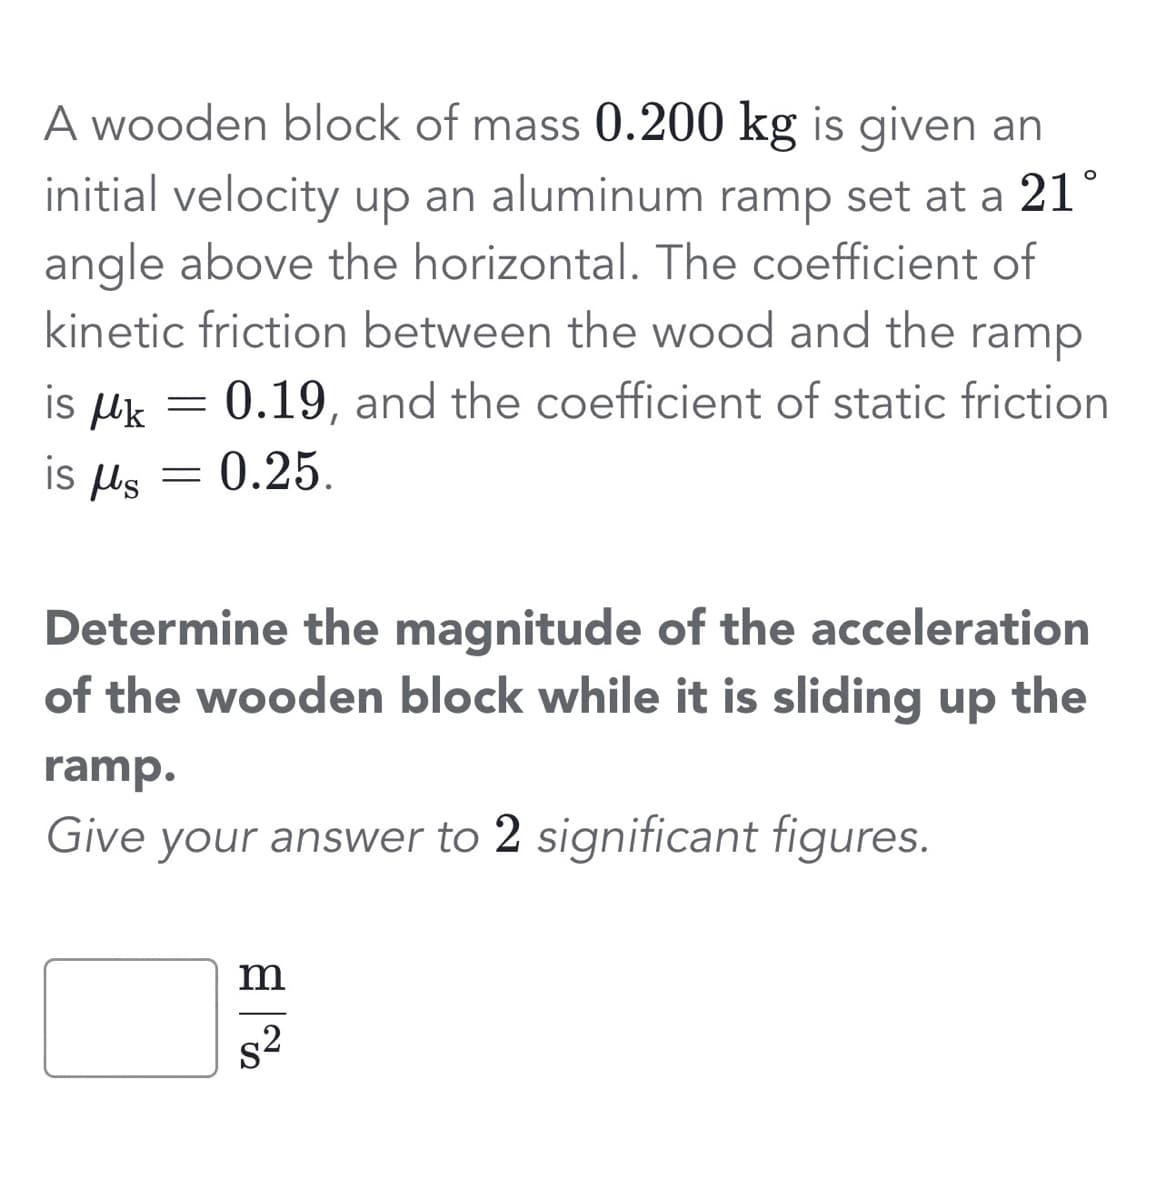 A wooden block of mass 0.200 kg is given an
initial velocity up an aluminum ramp set at a 21°
angle above the horizontal. The coefficient of
kinetic friction between the wood and the ramp
0.19, and the coefficient of static friction
0.25.
is k
is us
=
=
Determine the magnitude of the acceleration
of the wooden block while it is sliding up the
ramp.
Give your answer to 2 significant figures.
m
s²